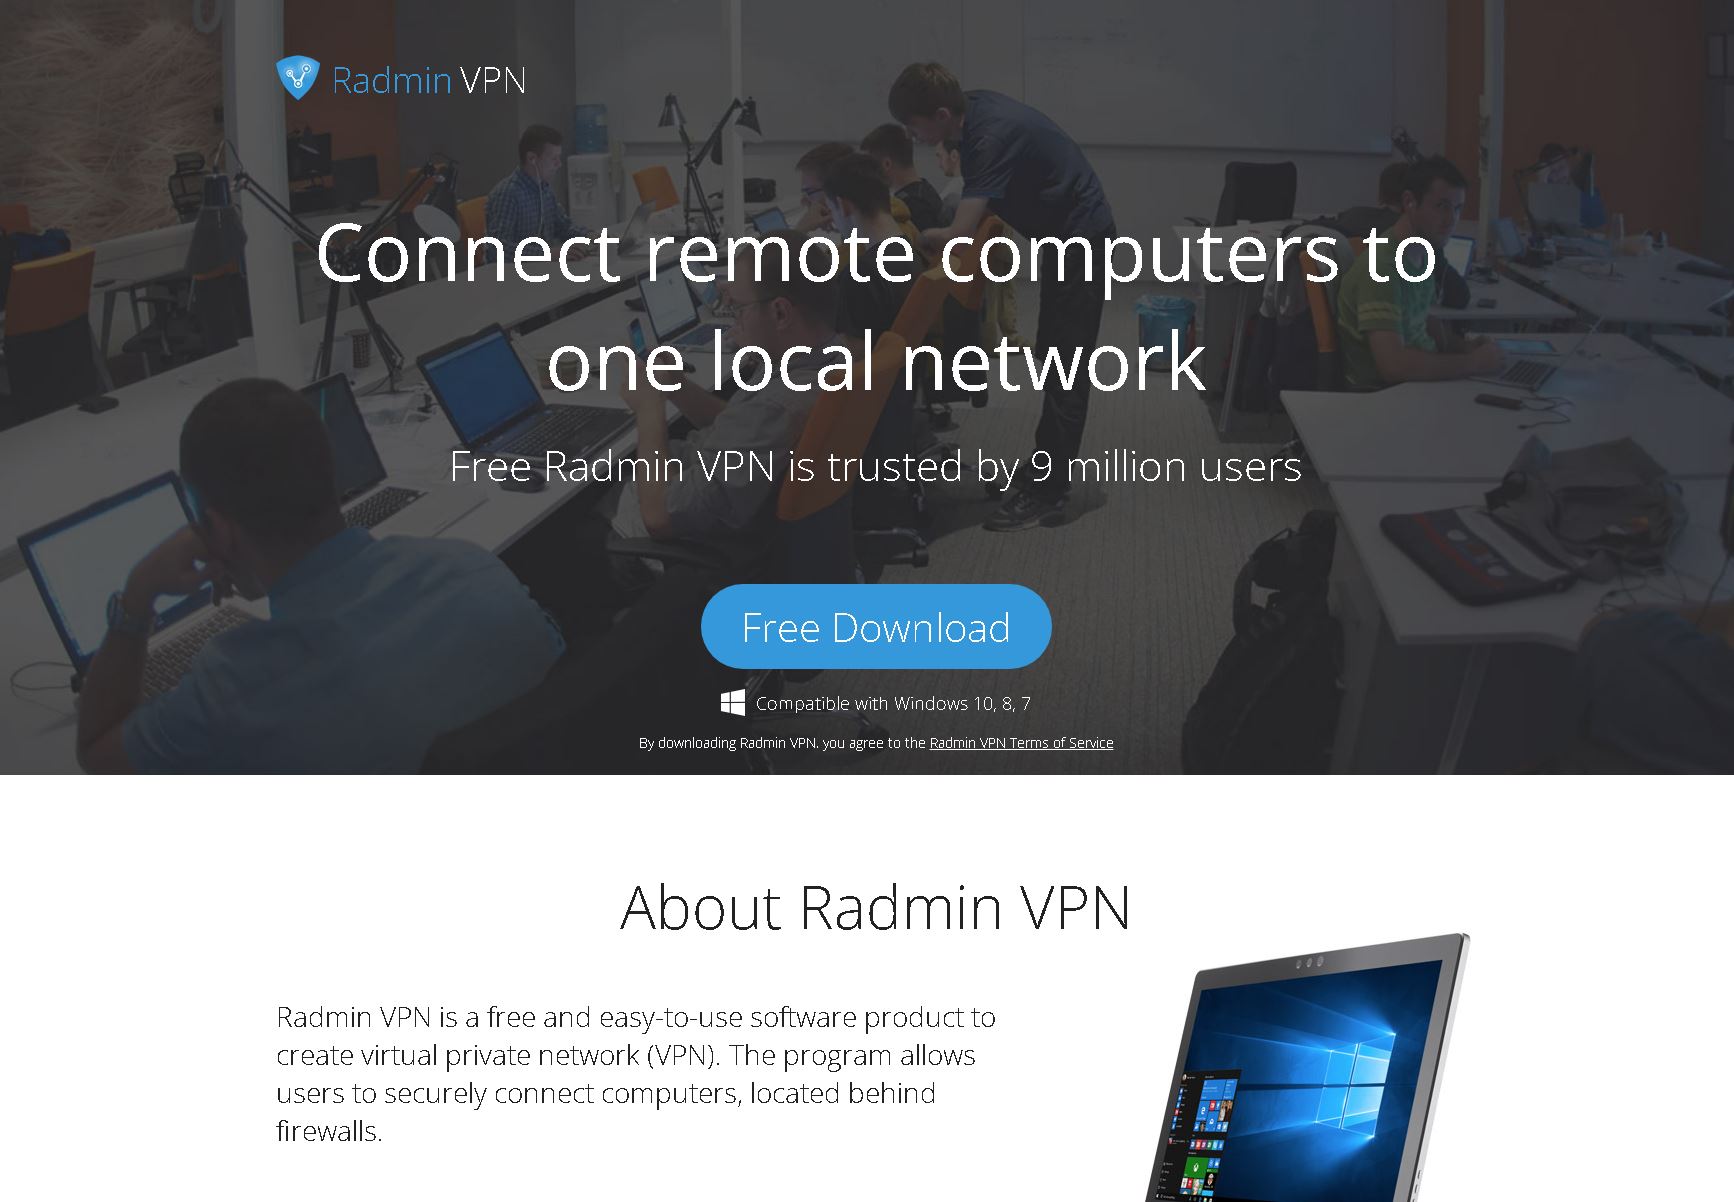 radmin vpn service is not available